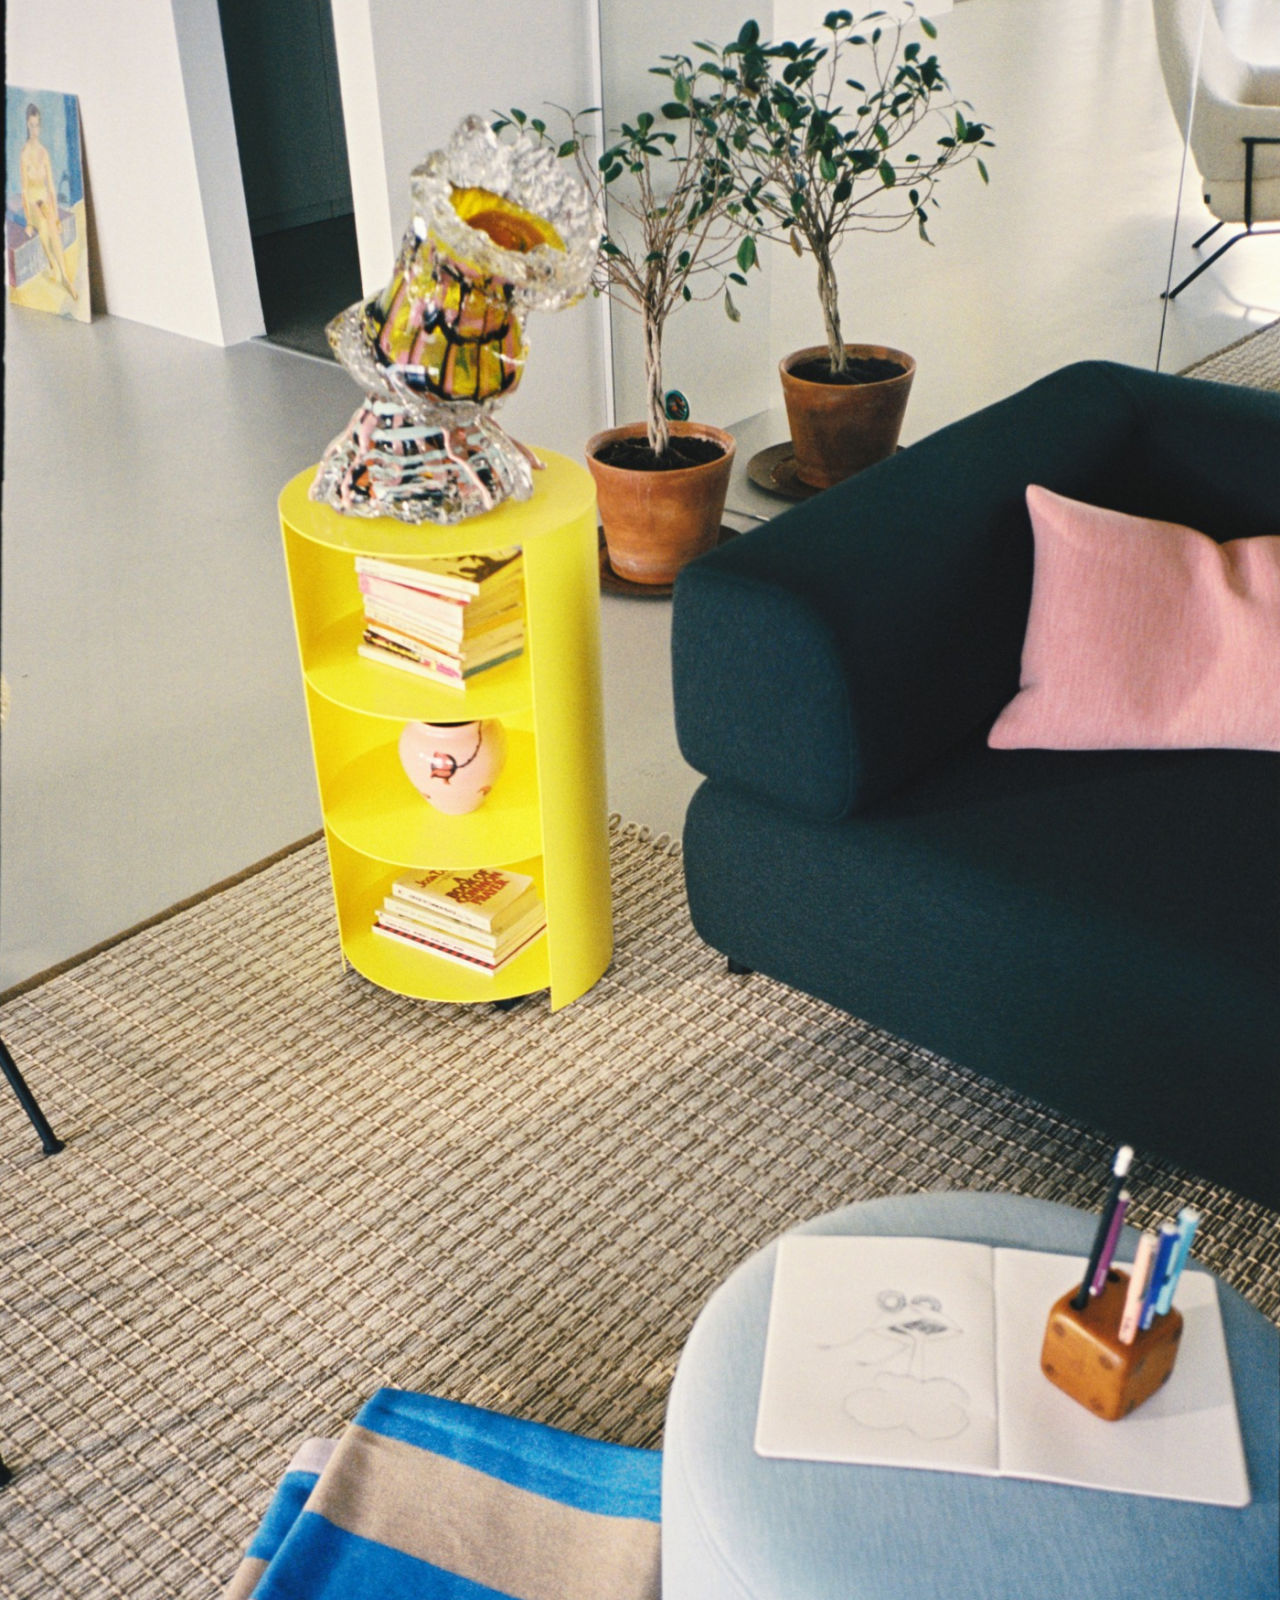 An analog image of a lounge/living room scene featuring Neo Cushion Large, Palo Modular Sofa, Rope Rug, Hide Pedestal, Stripe Throw, and Bon Pouf Round.